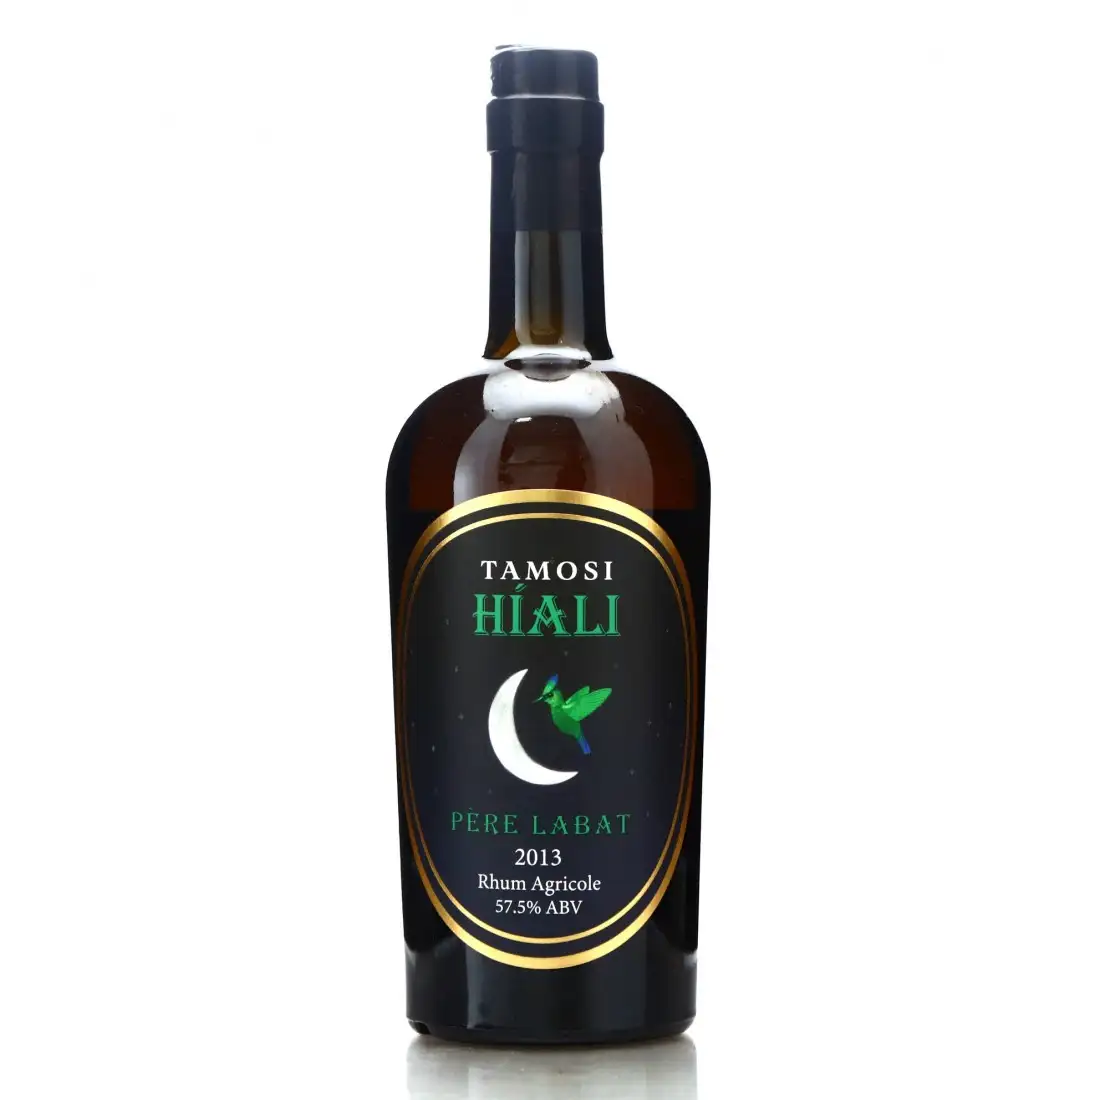 Image of the front of the bottle of the rum Tamosi Père Labat (Hiali)